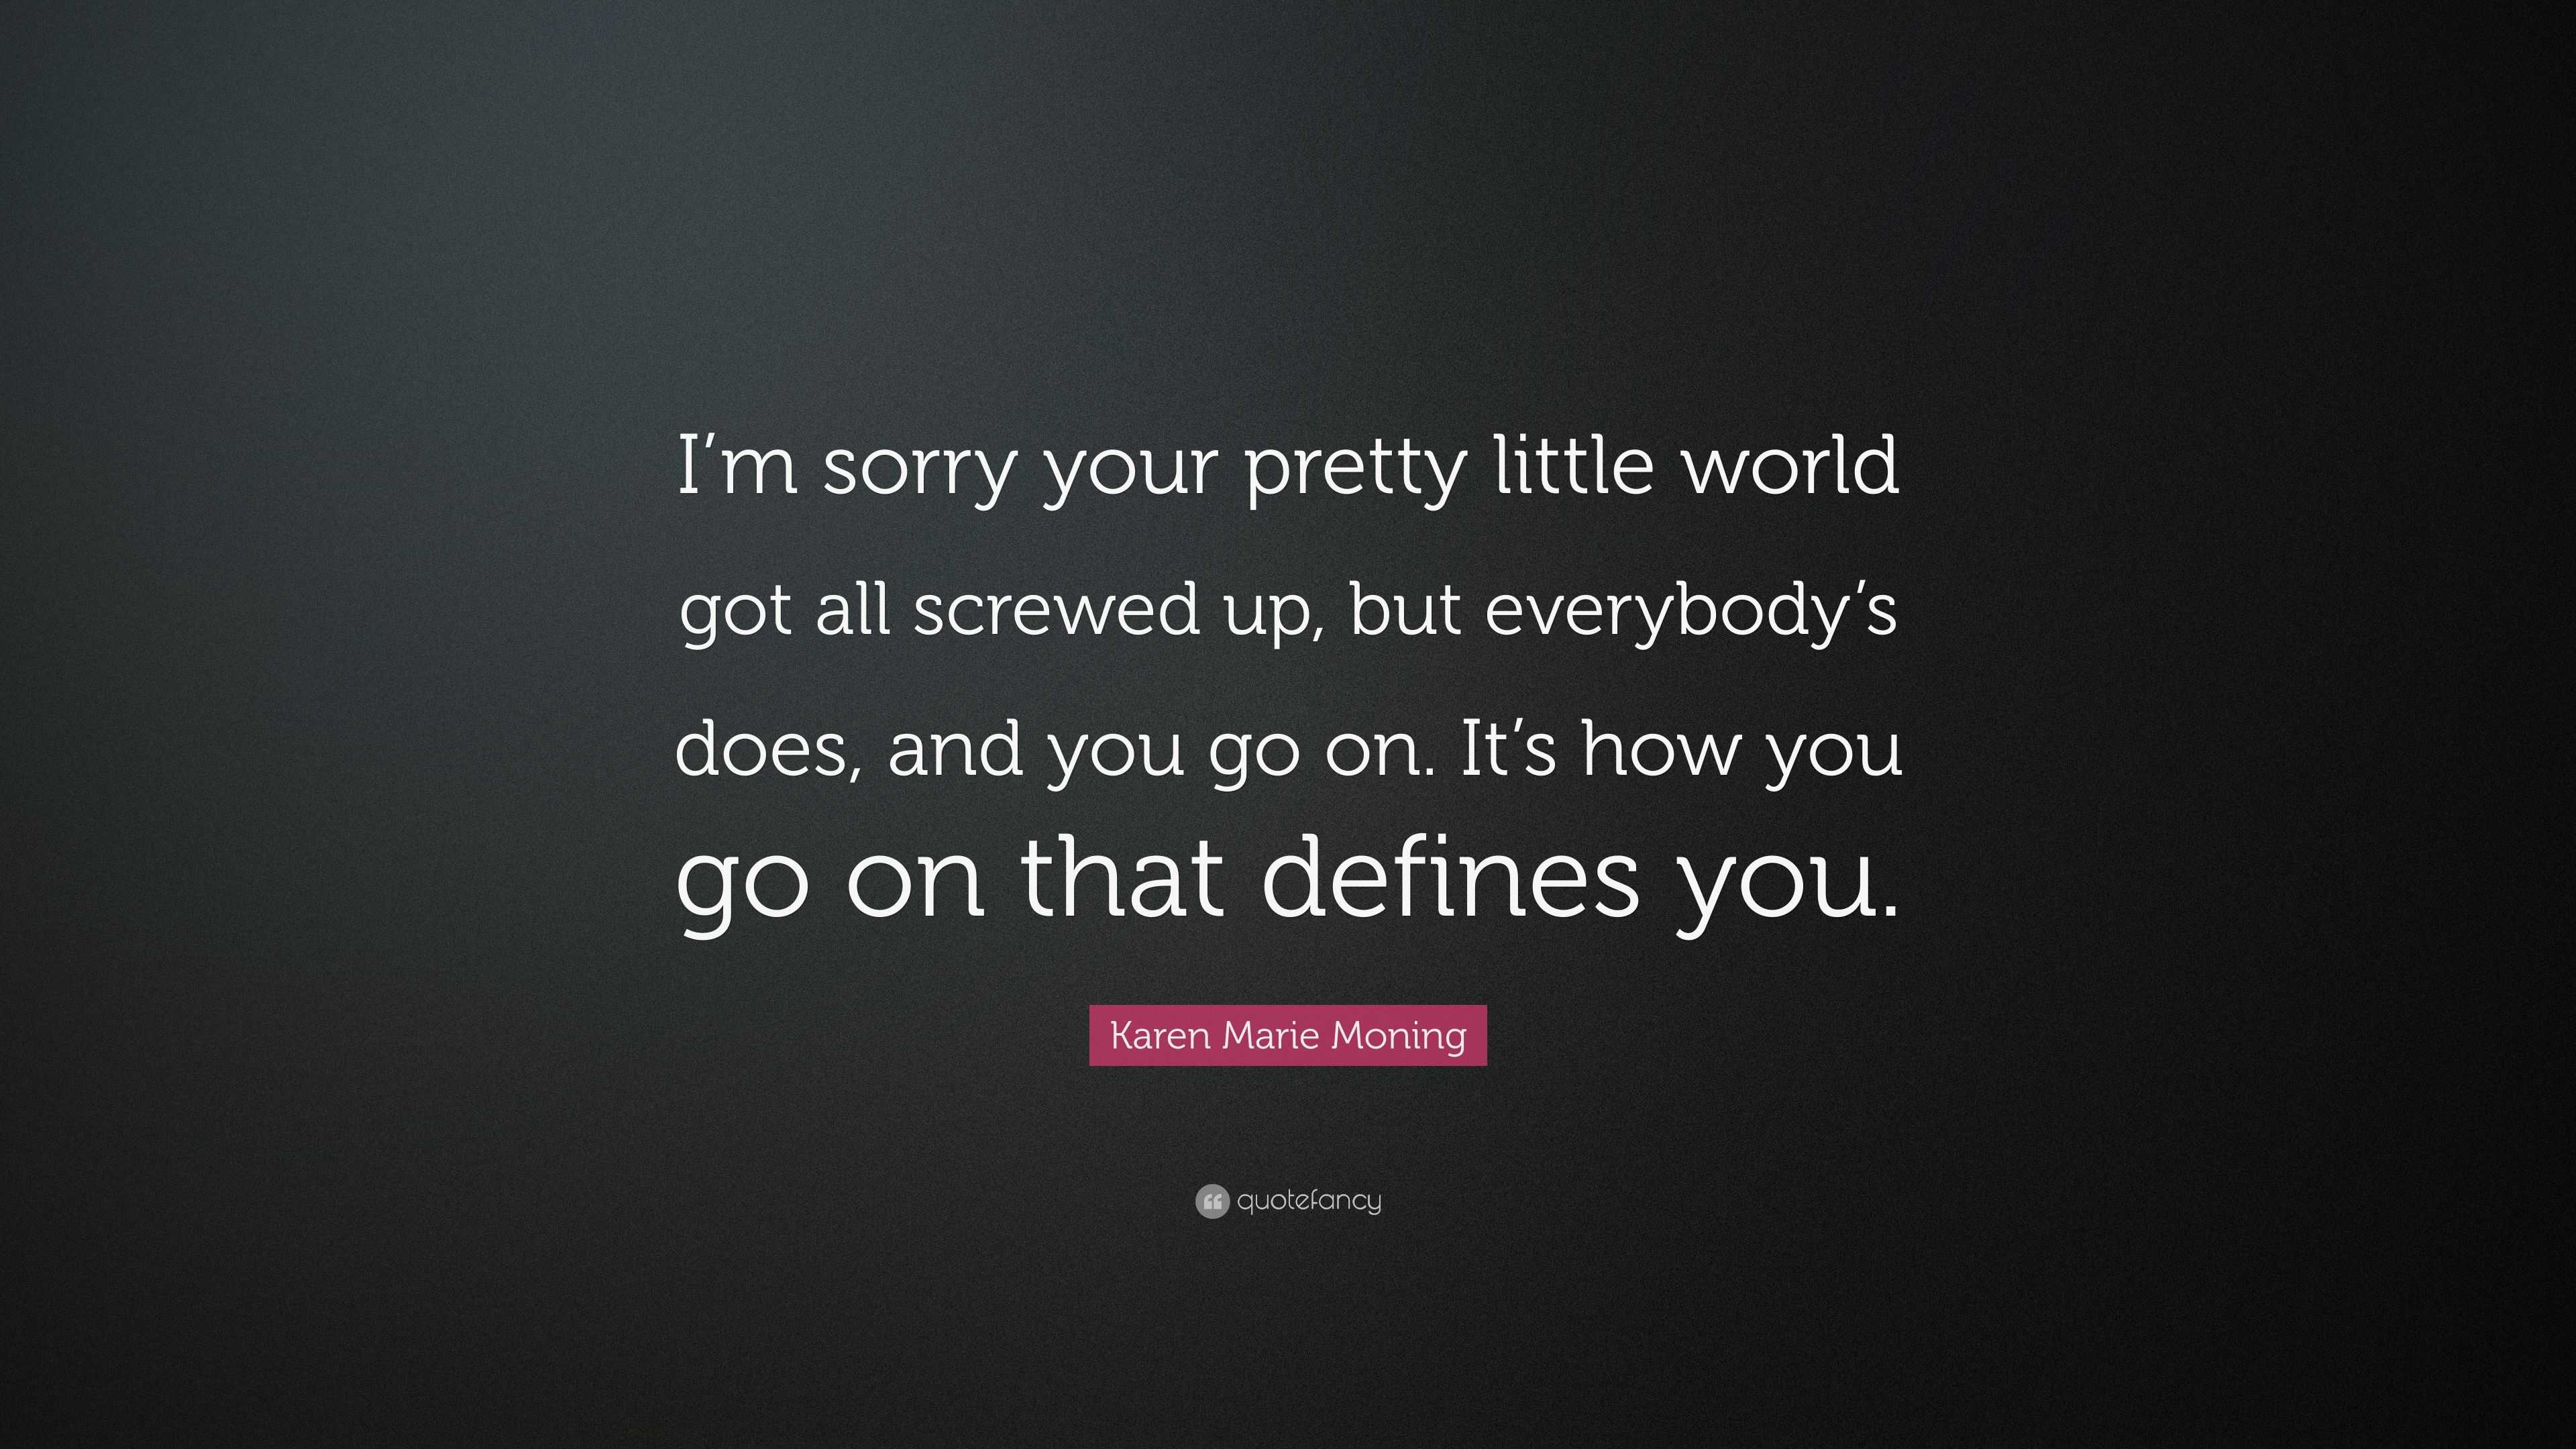 Karen Marie Moning Quote I M Sorry Your Pretty Little World Got All Screwed Up But Everybody S Does And You Go On It S How You Go On That Defi 7 Wallpapers Quotefancy